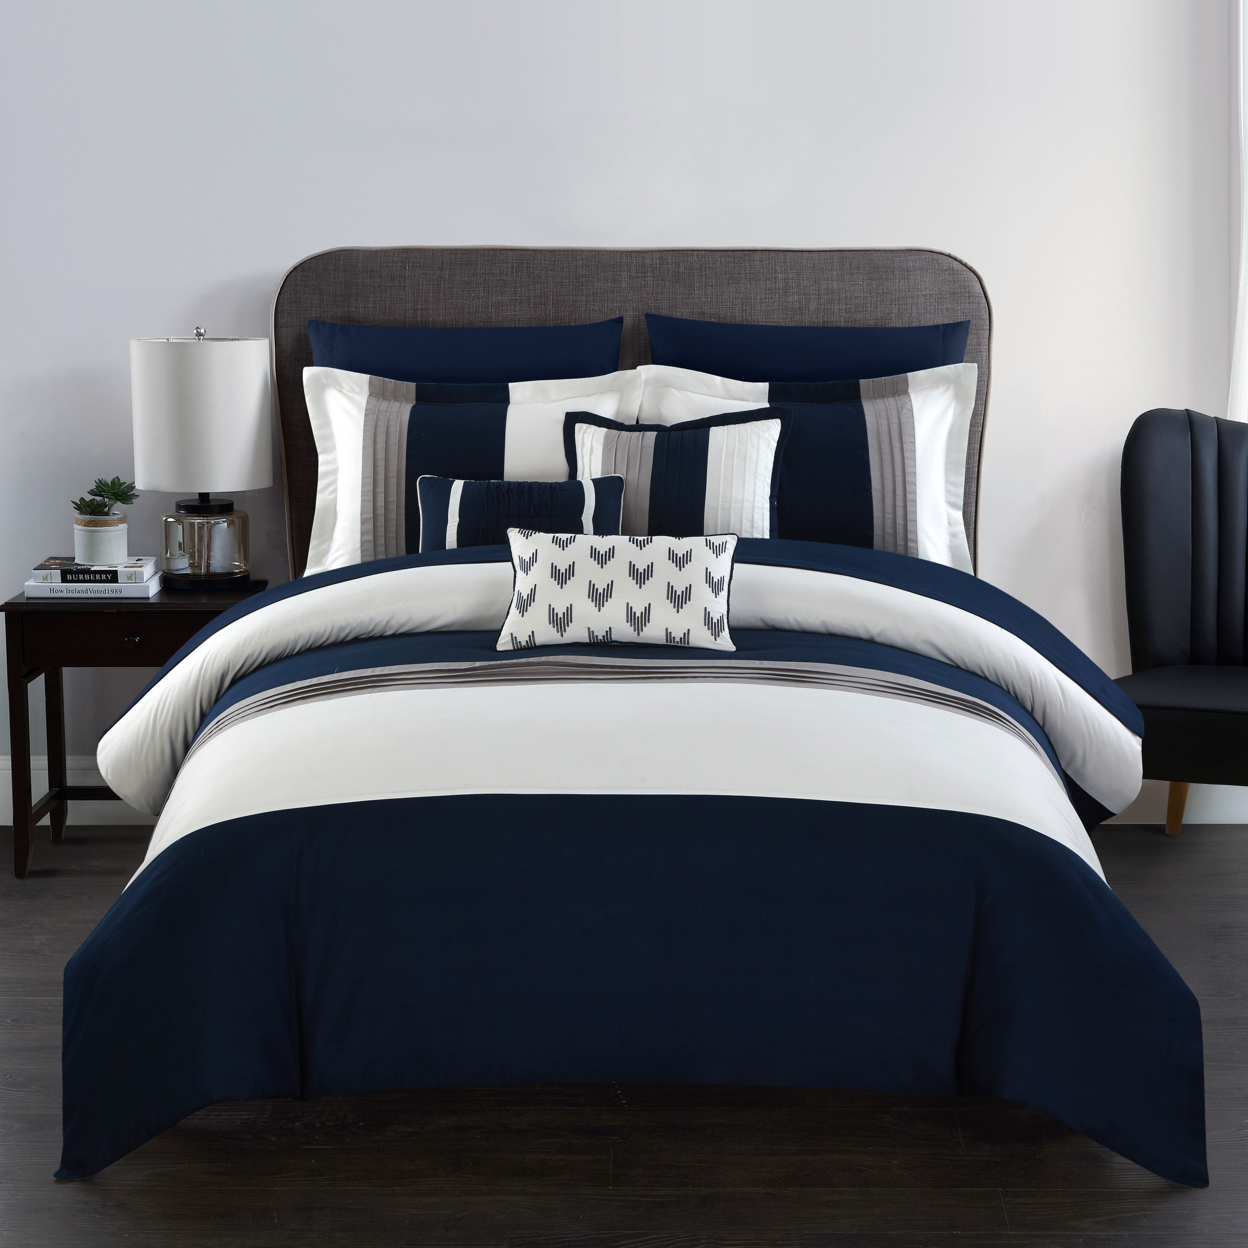 Rashi 10 Or 8 Piece Color Block Bed In A Bag Bedding And Comforter Set - Navy, Twin